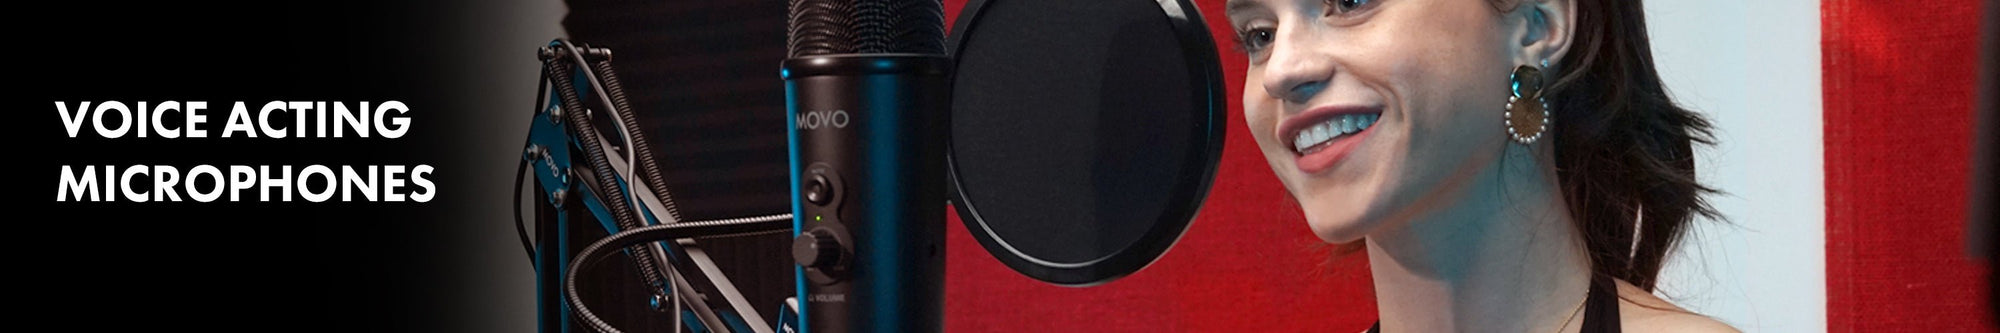 Best Microphones for Voice Acting and Voice-overs